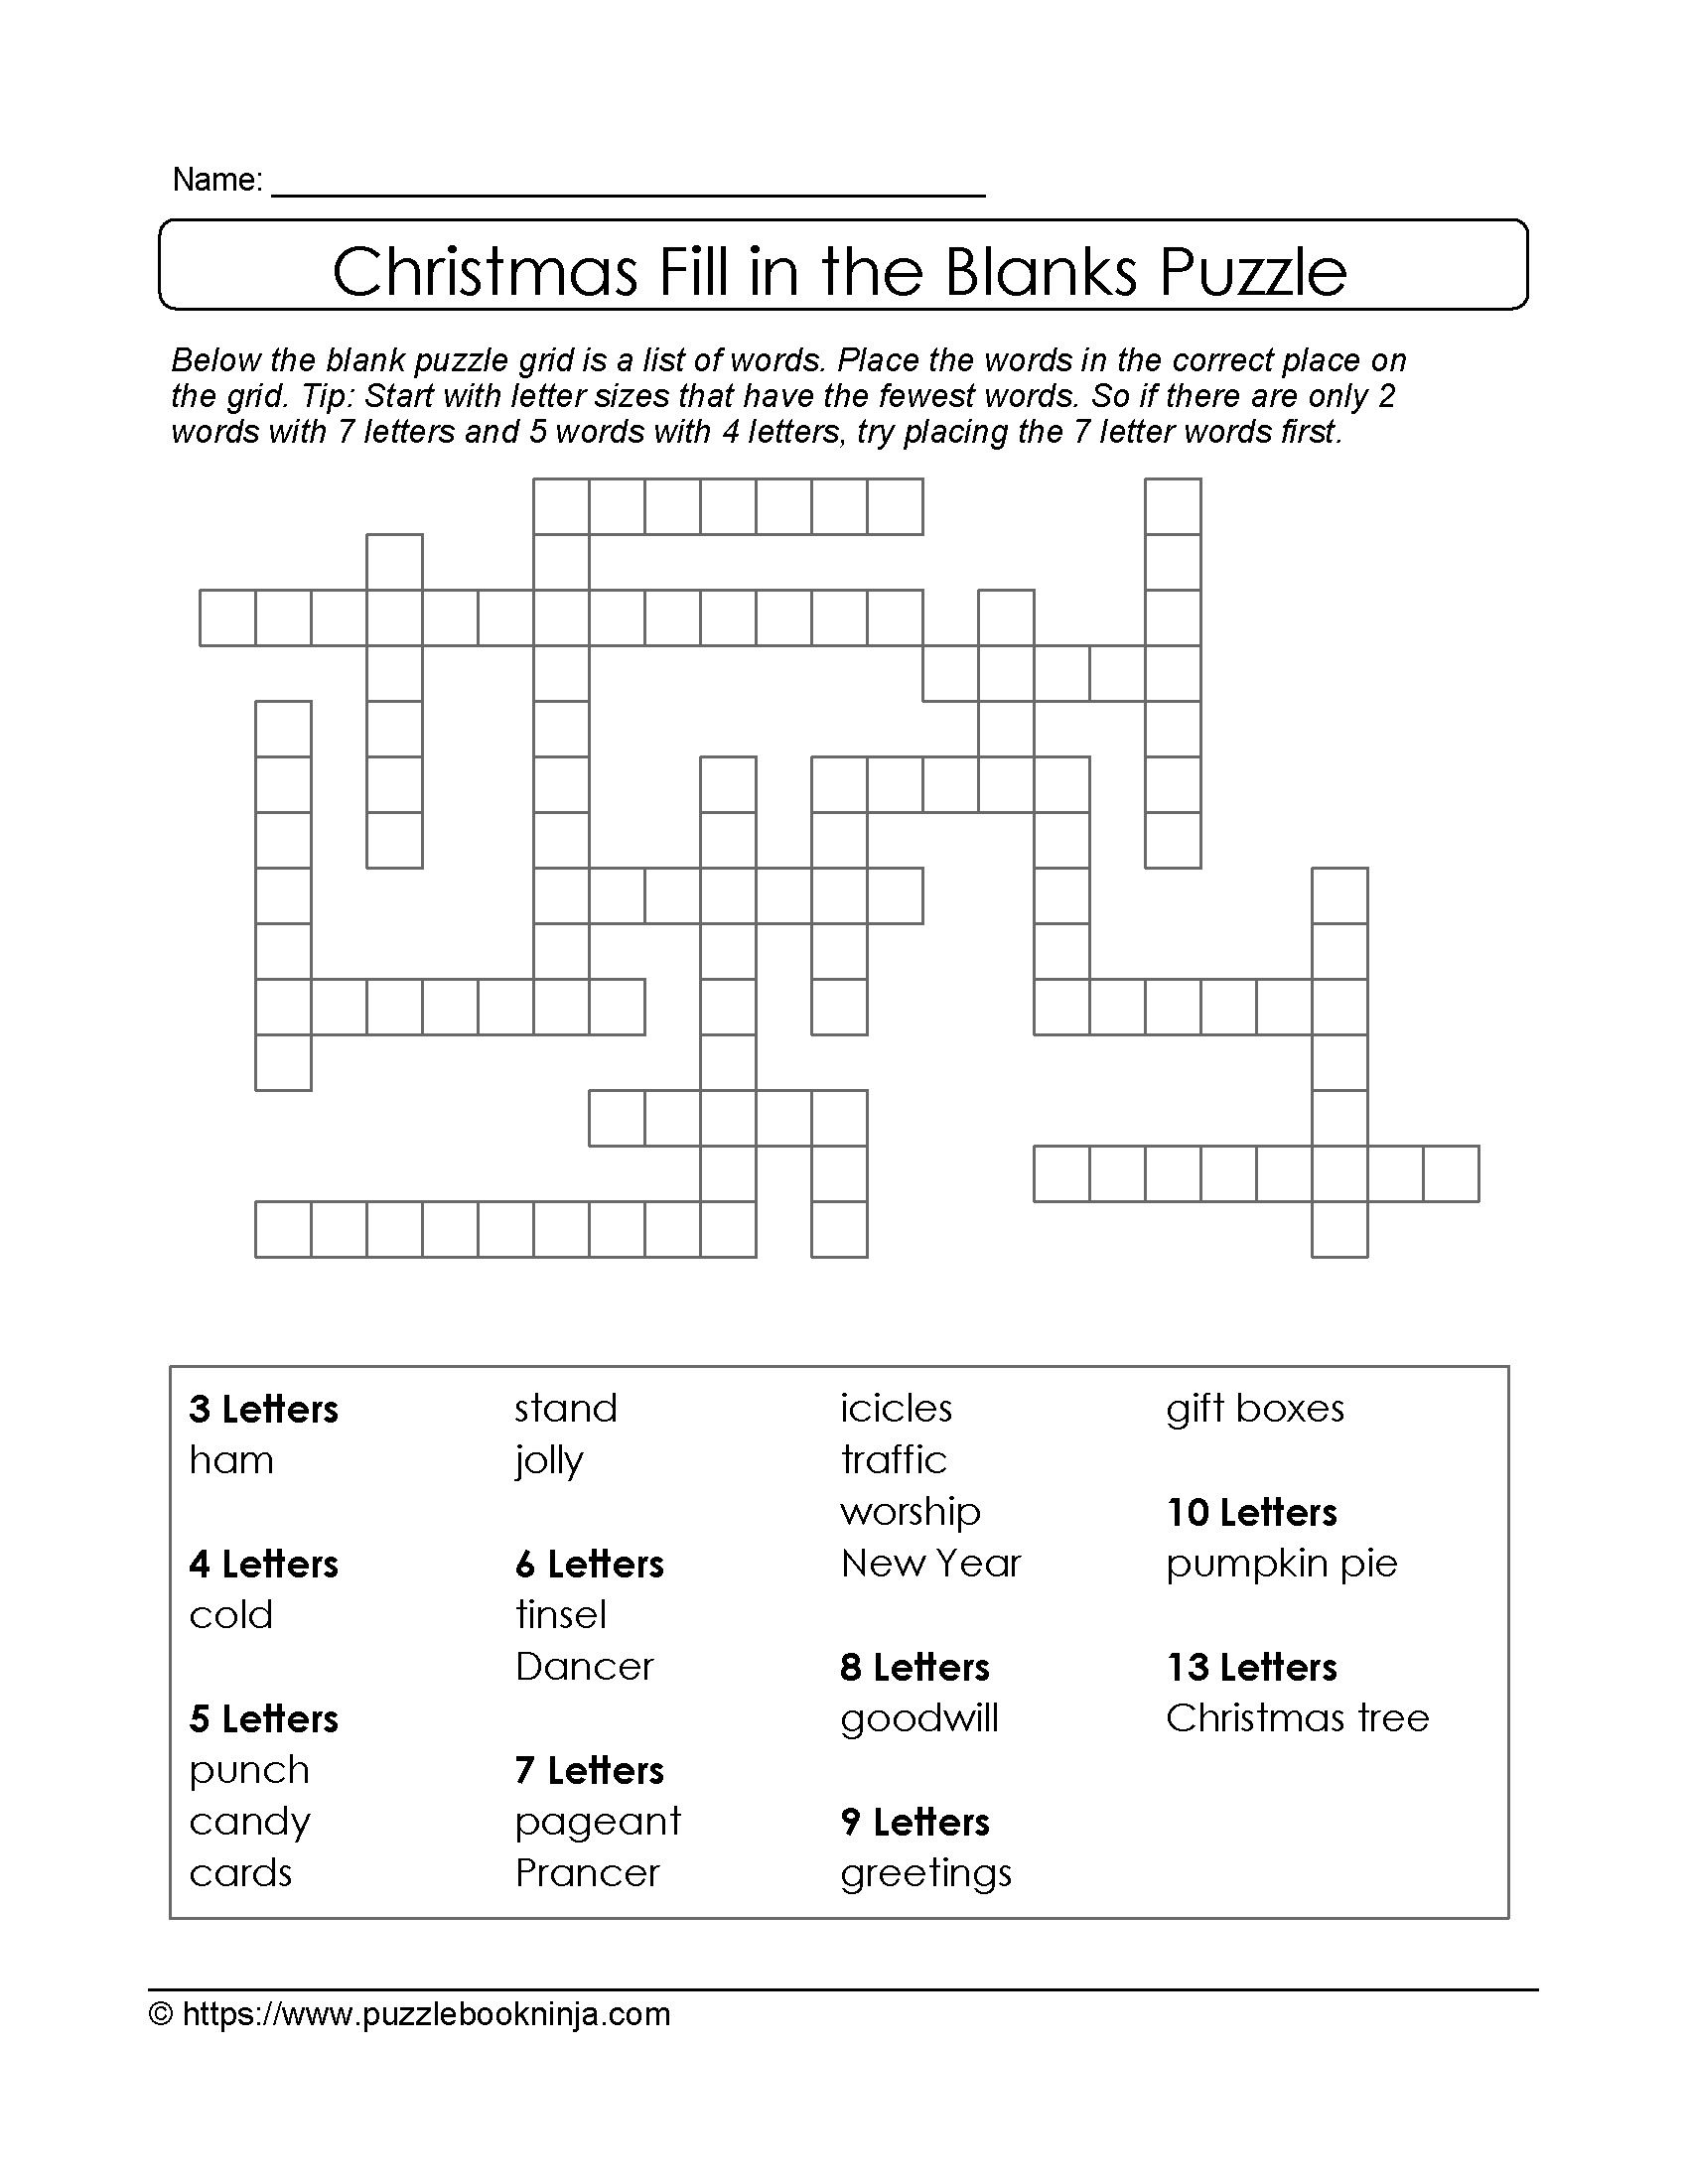 Freebie Xmas Puzzle To Print. Fill In The Blanks Crossword Like - English Language Crossword Puzzles Printable